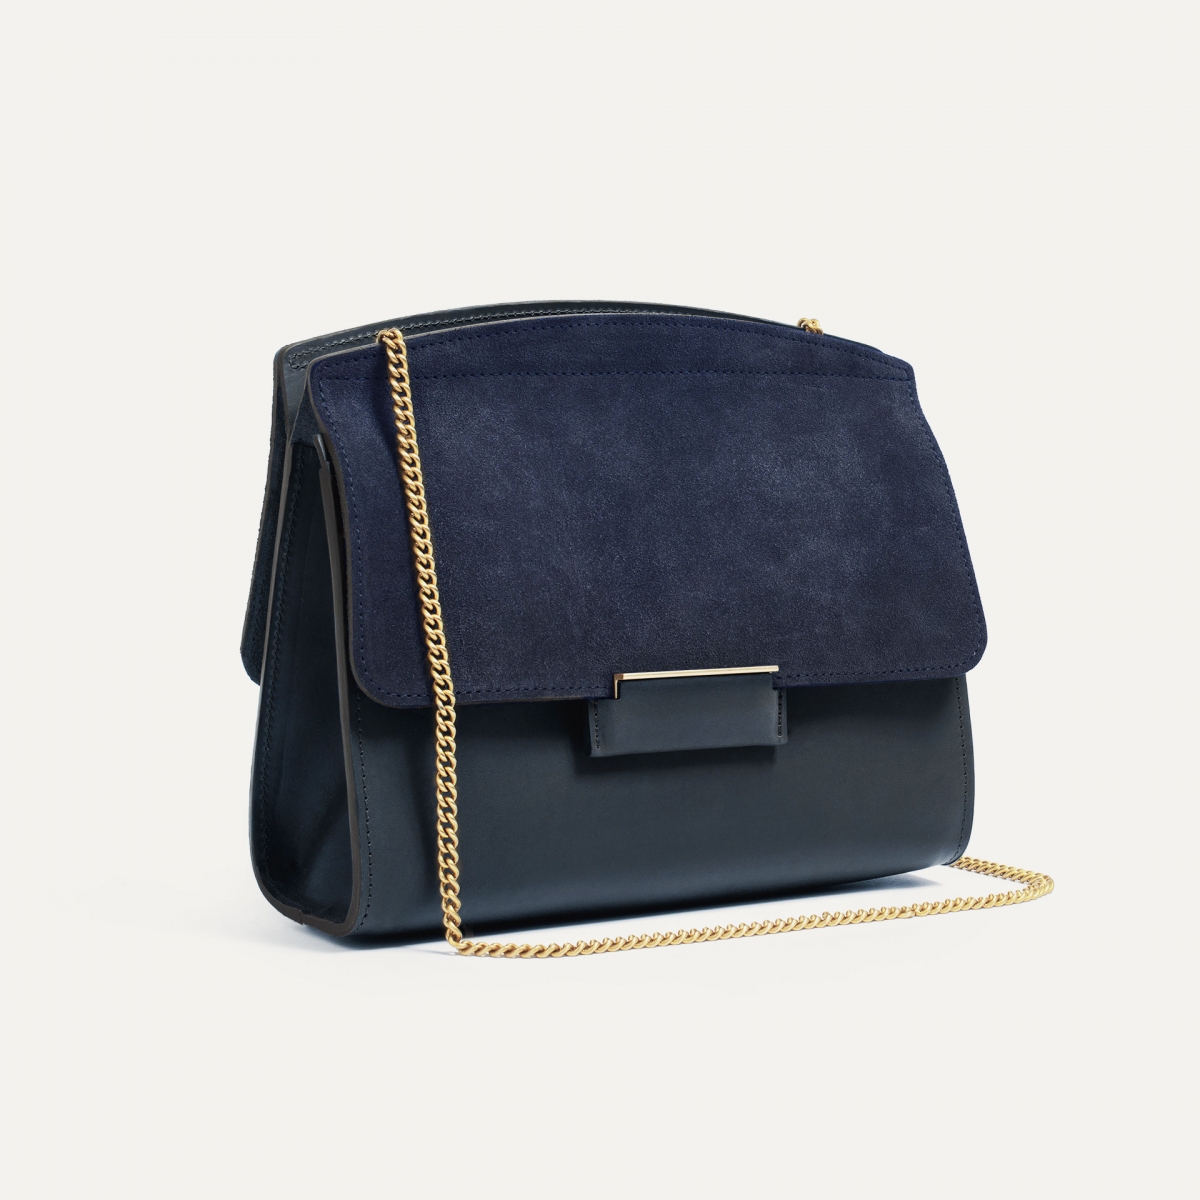 Origami S clutch bag - Navy Blue / MIx (image n°3)